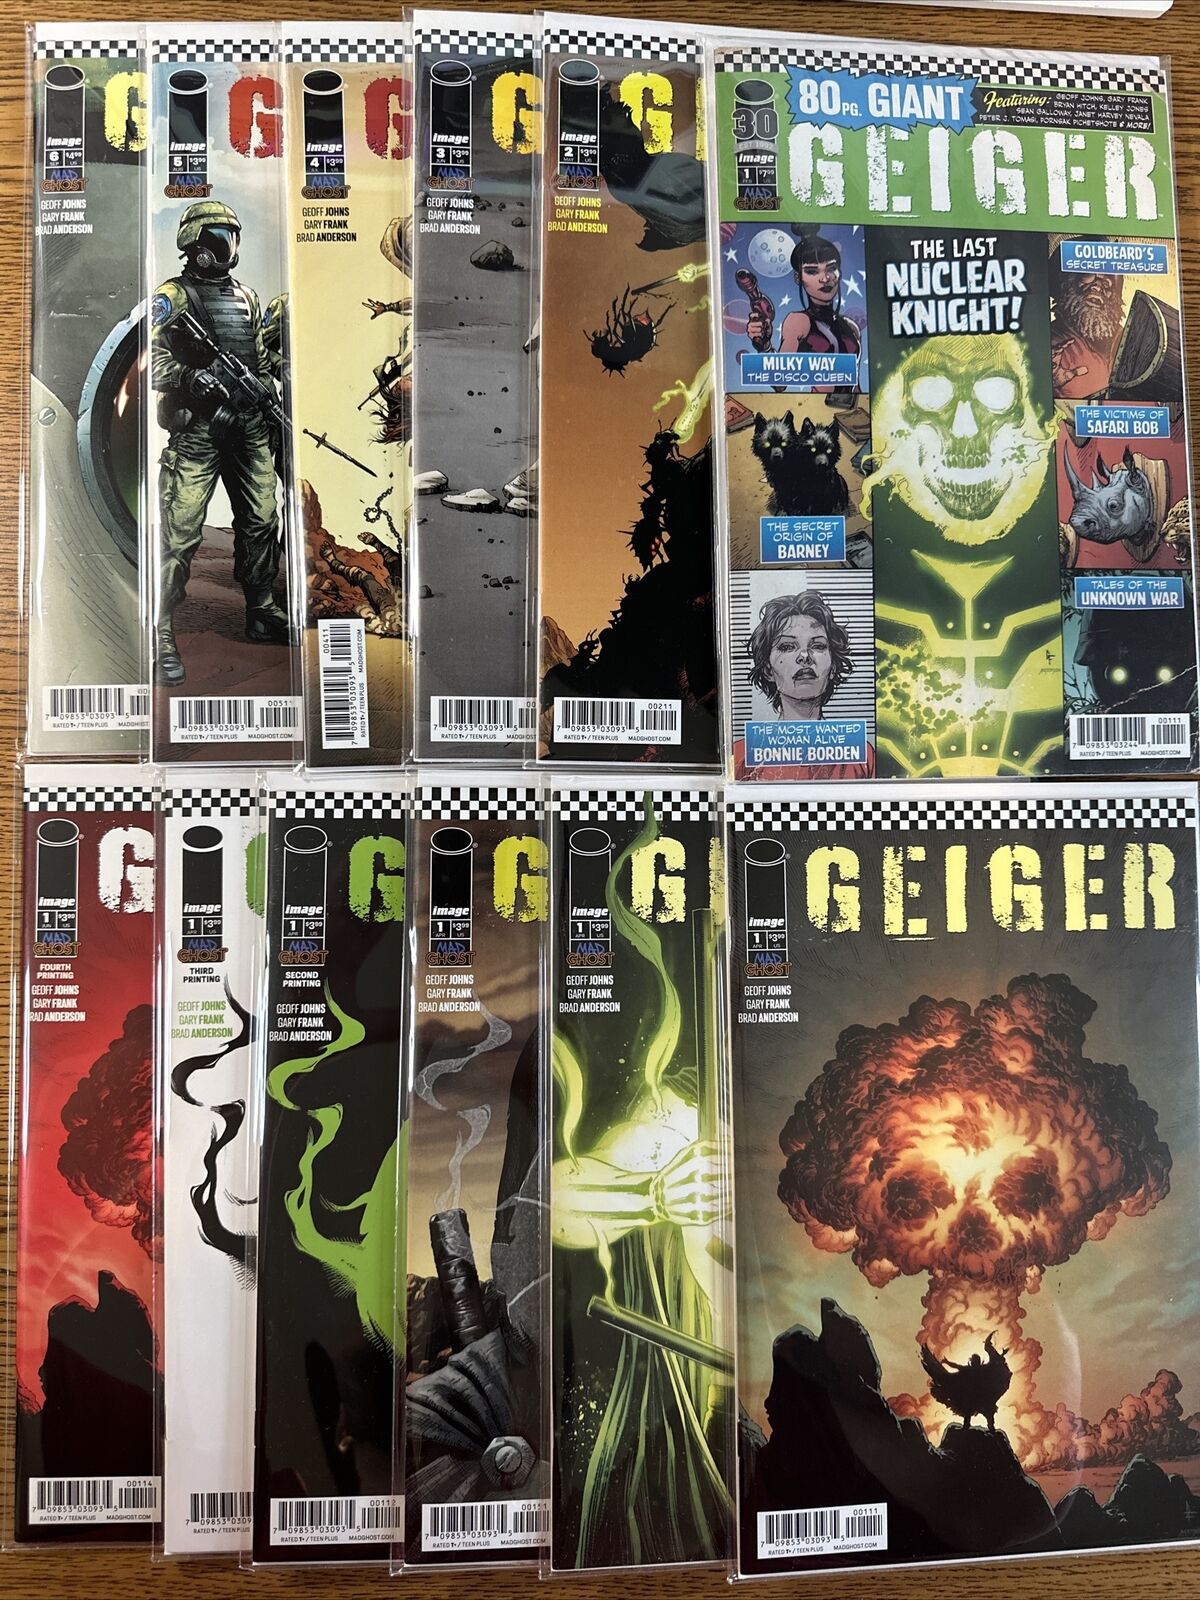 Geiger #1 x6 Variants 2 3 4 5 6 + 80 Page Giant Lot Run Set Image Near Mint